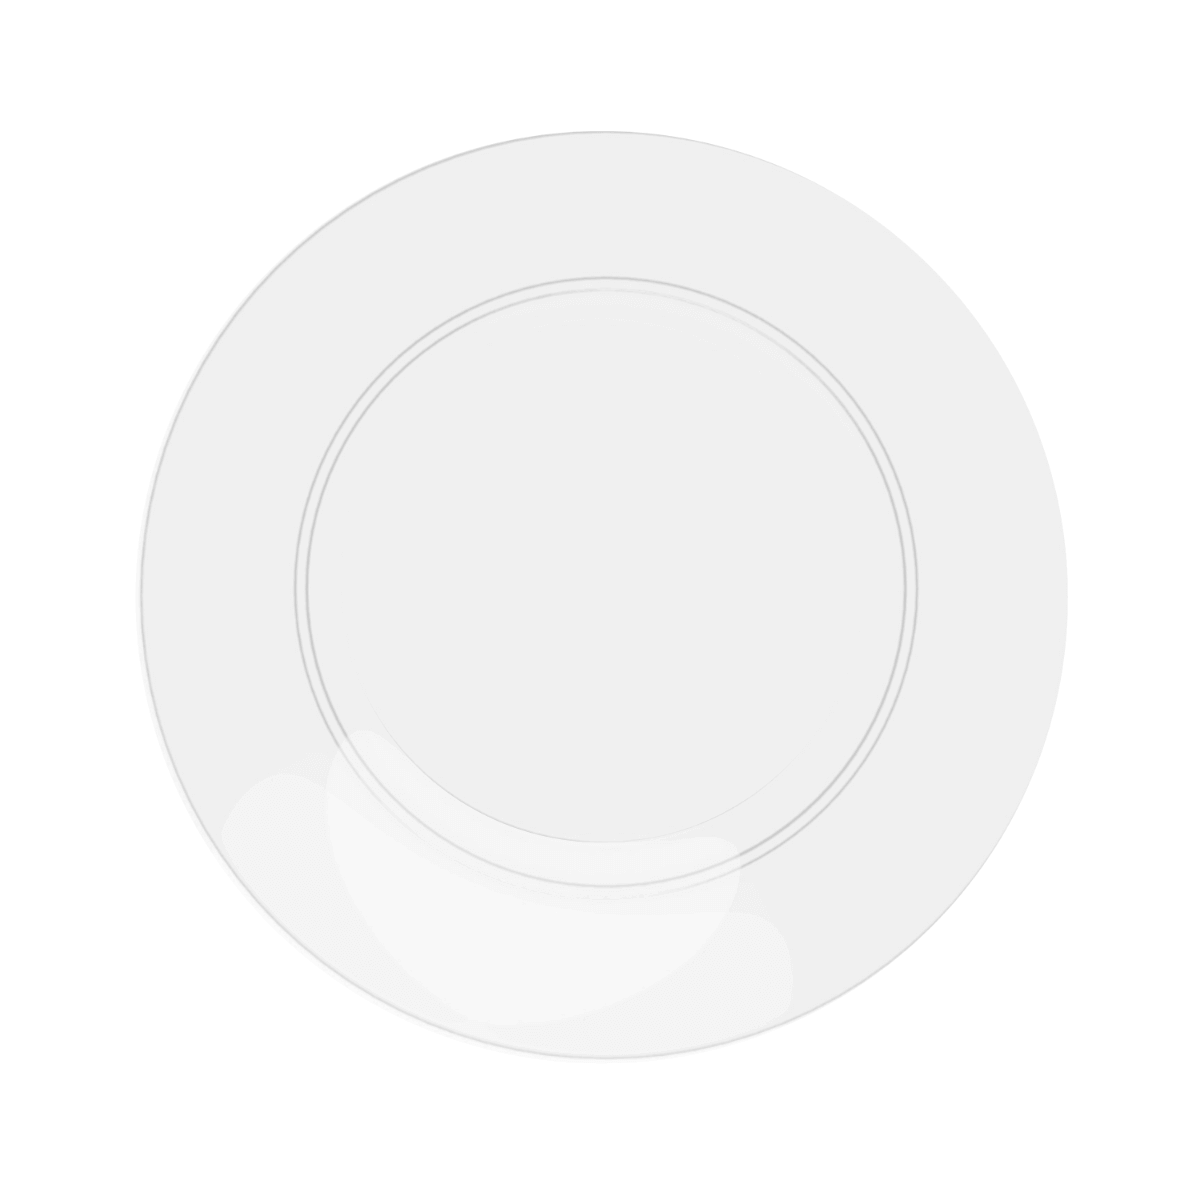 10" Trend Glass Look Plastic Plates (40 Count) - Yom Tov Settings